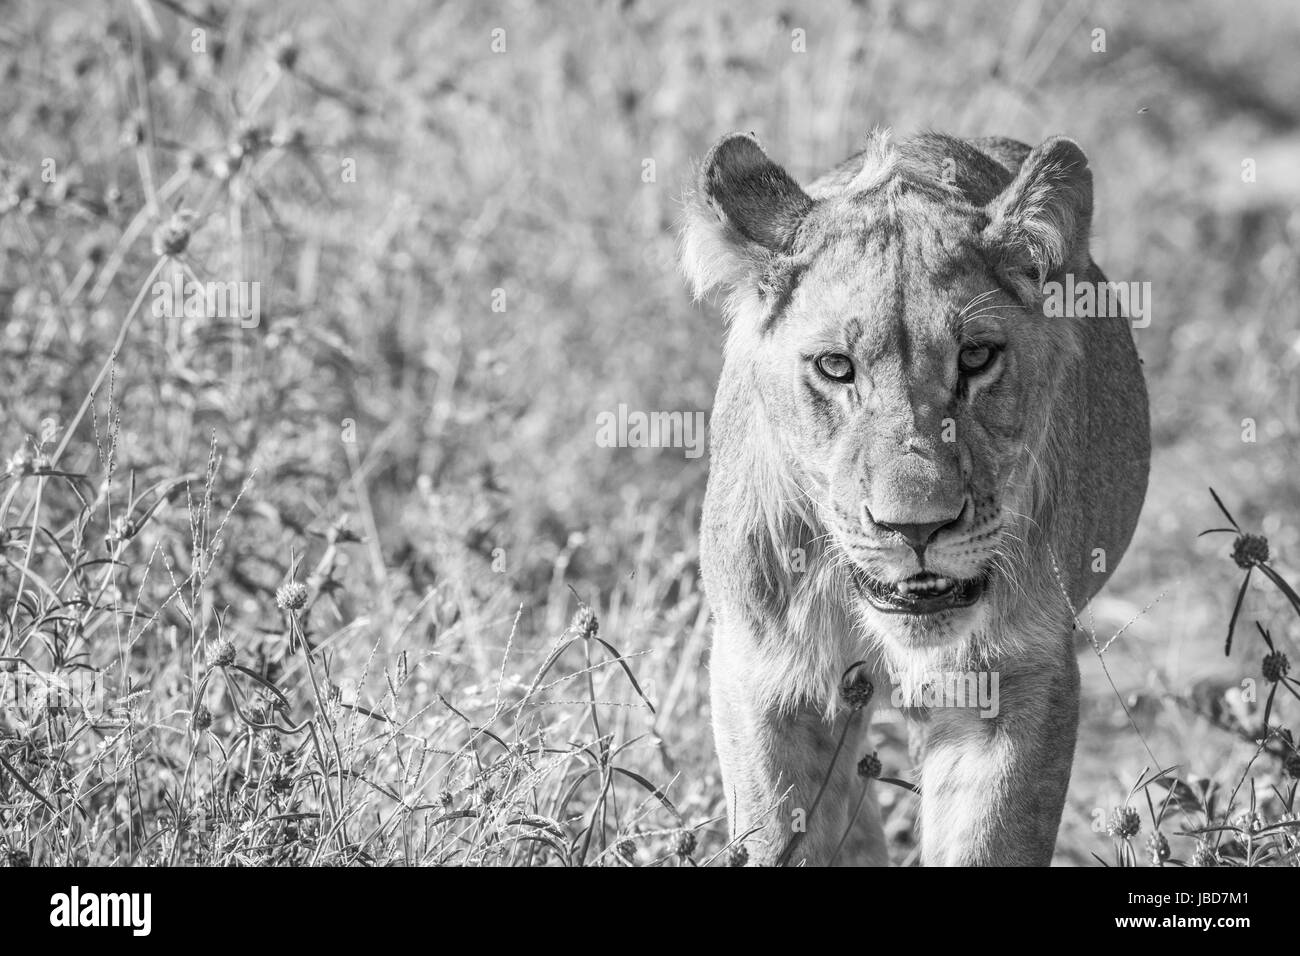 Lion walking towards the camera in black and white in the Chobe National Park, Botswana. Stock Photo